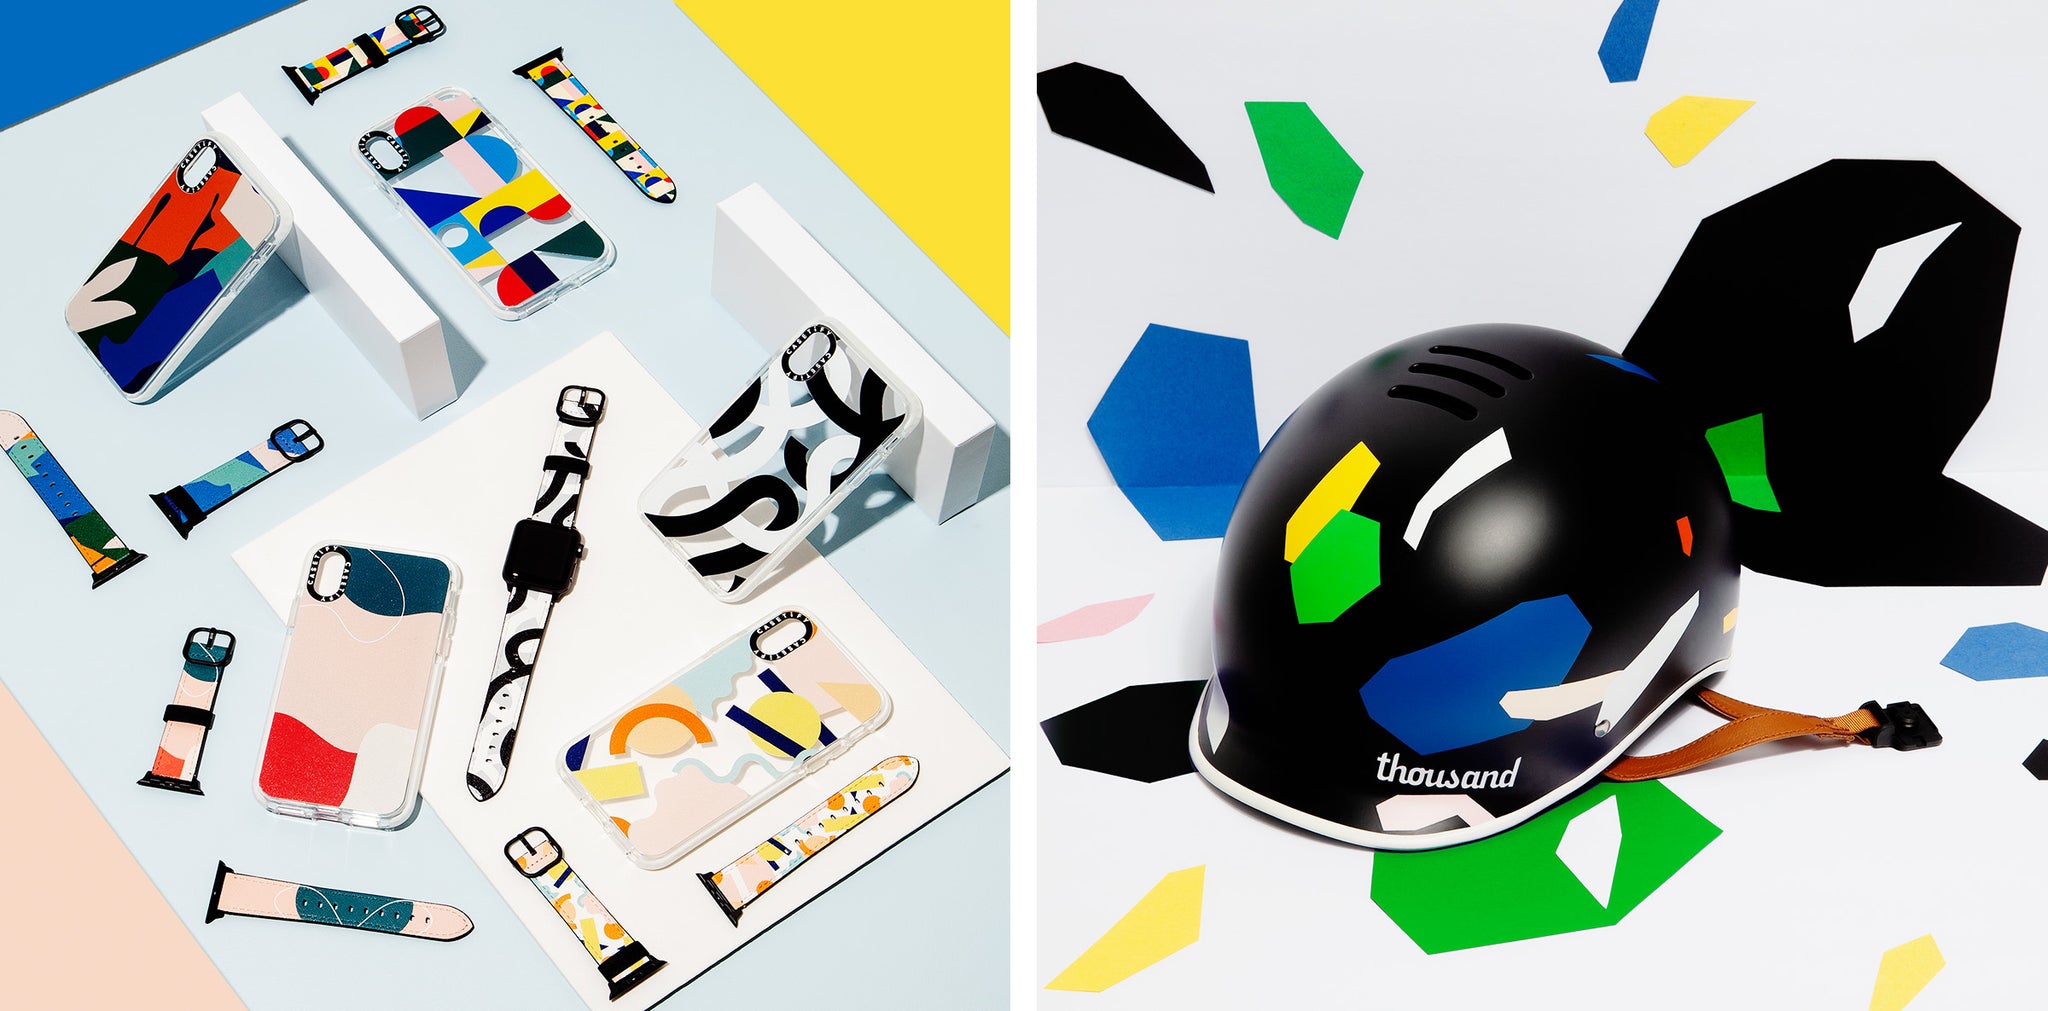 Poketo Collaborations with Casetify iPhone accessories & Thousand Bike Helmets